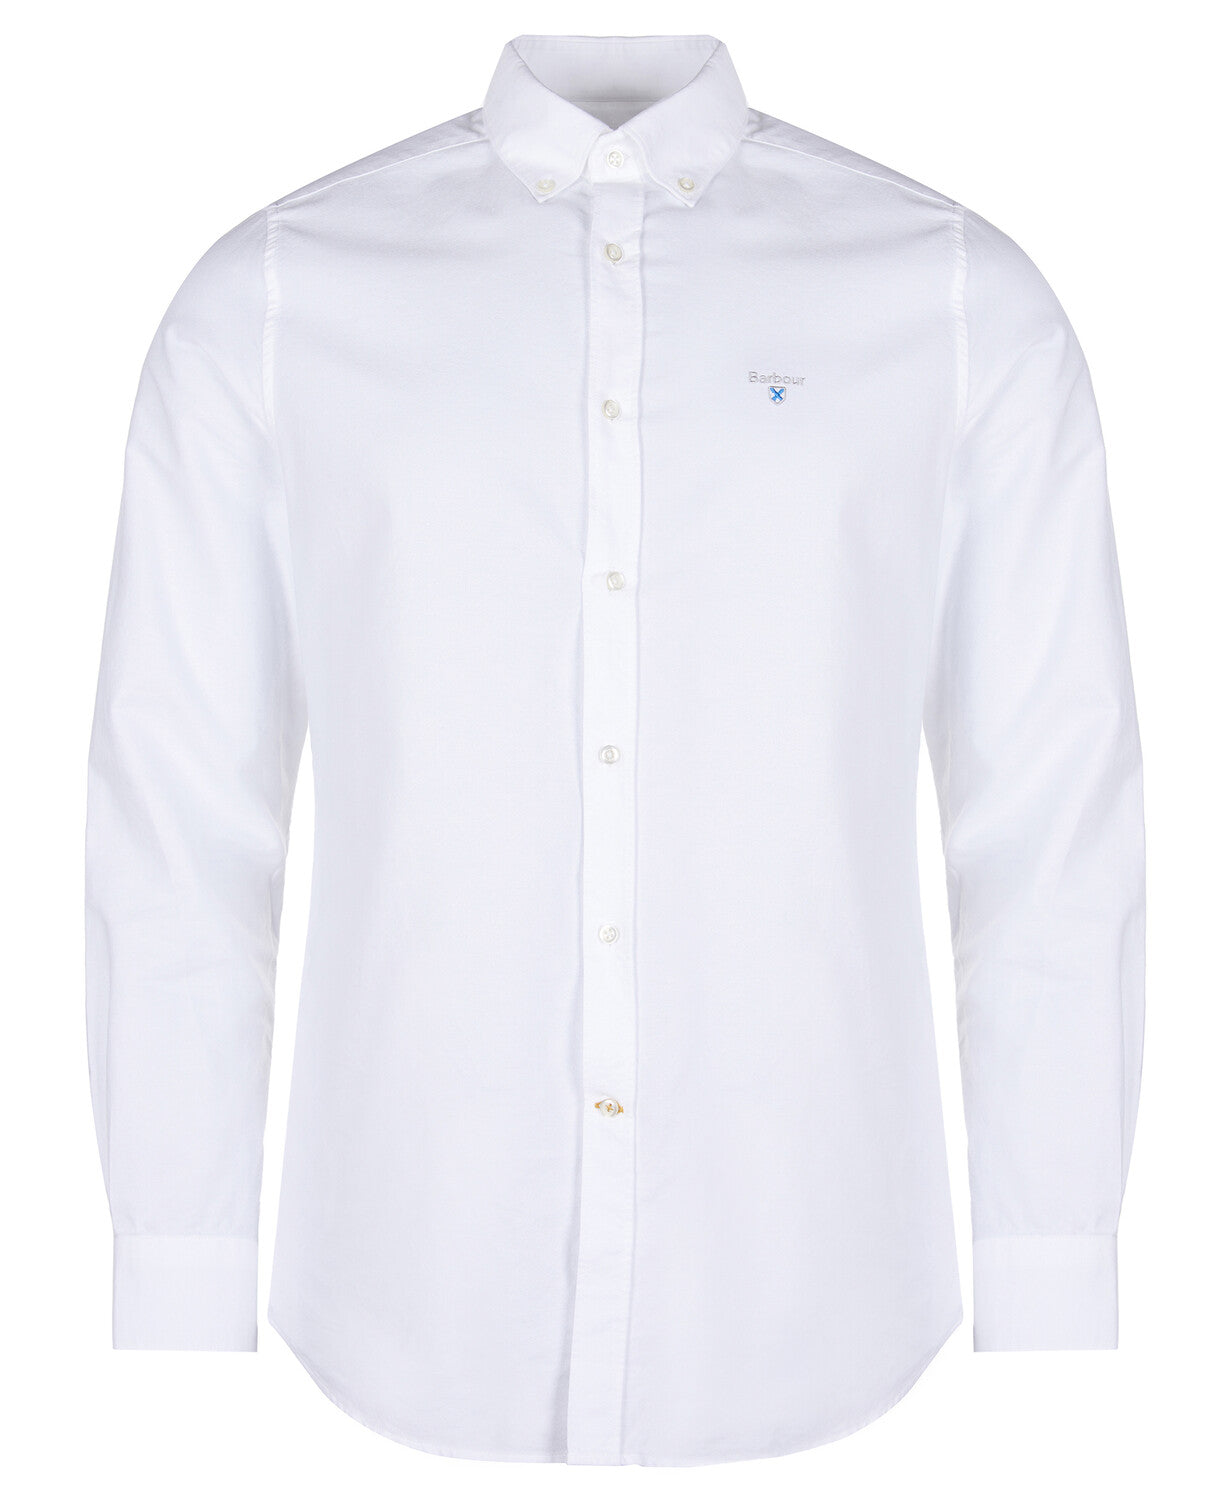 BARBOUR Oxford Tailored Shirt WHITE